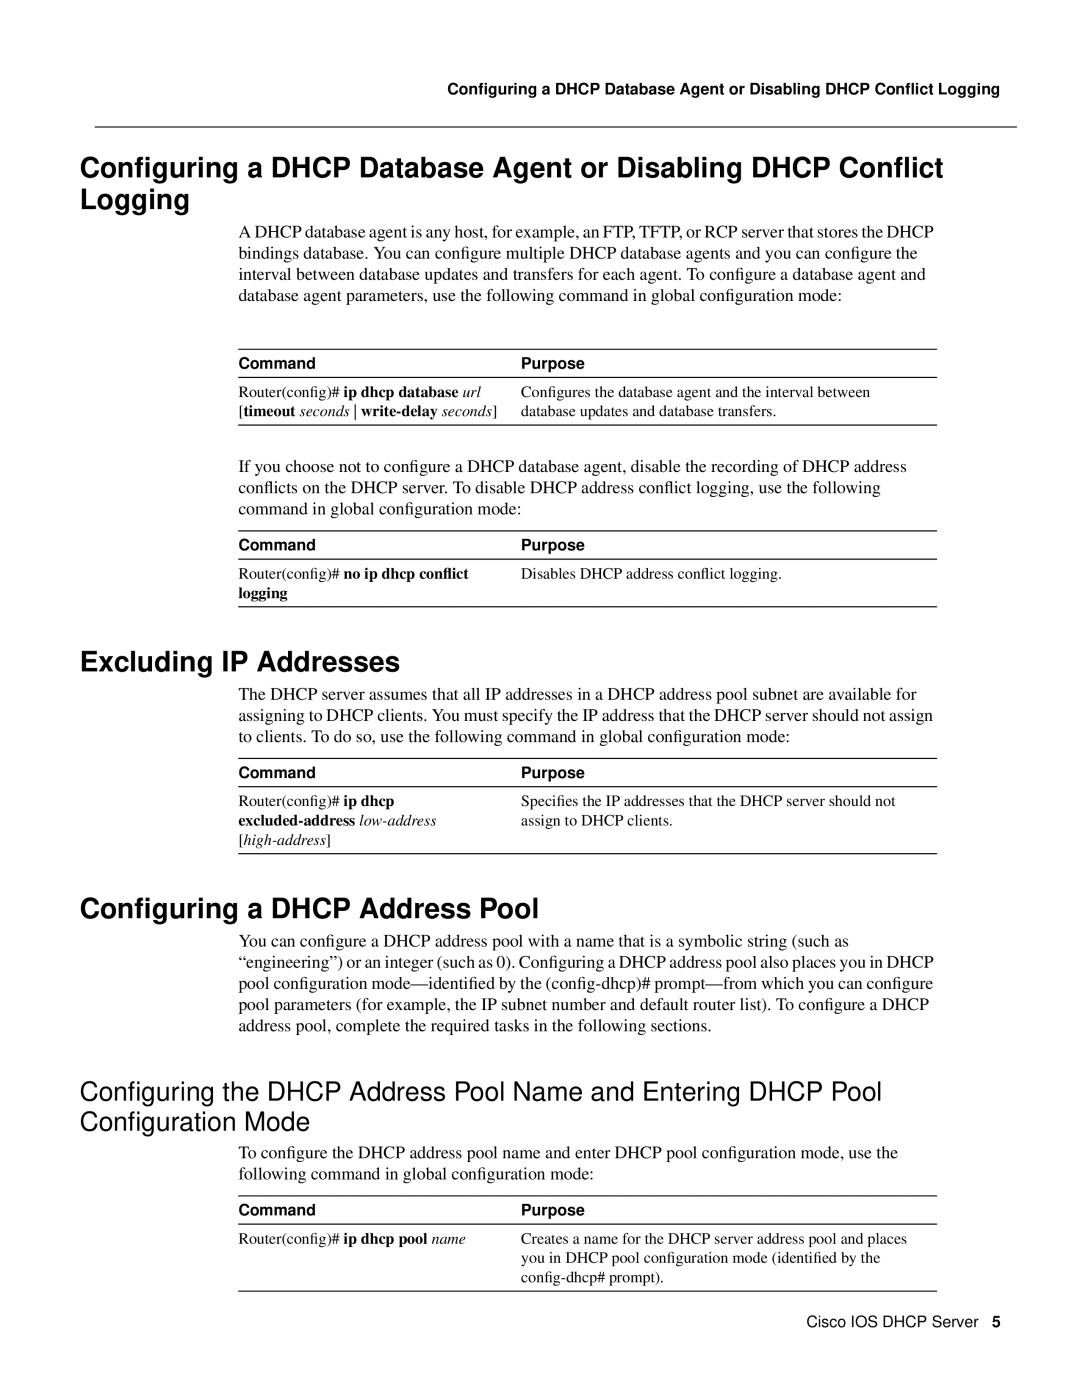 Cisco Systems 32369 Conﬁguring a DHCP Database Agent or Disabling DHCP Conﬂict Logging, Excluding IP Addresses, logging 